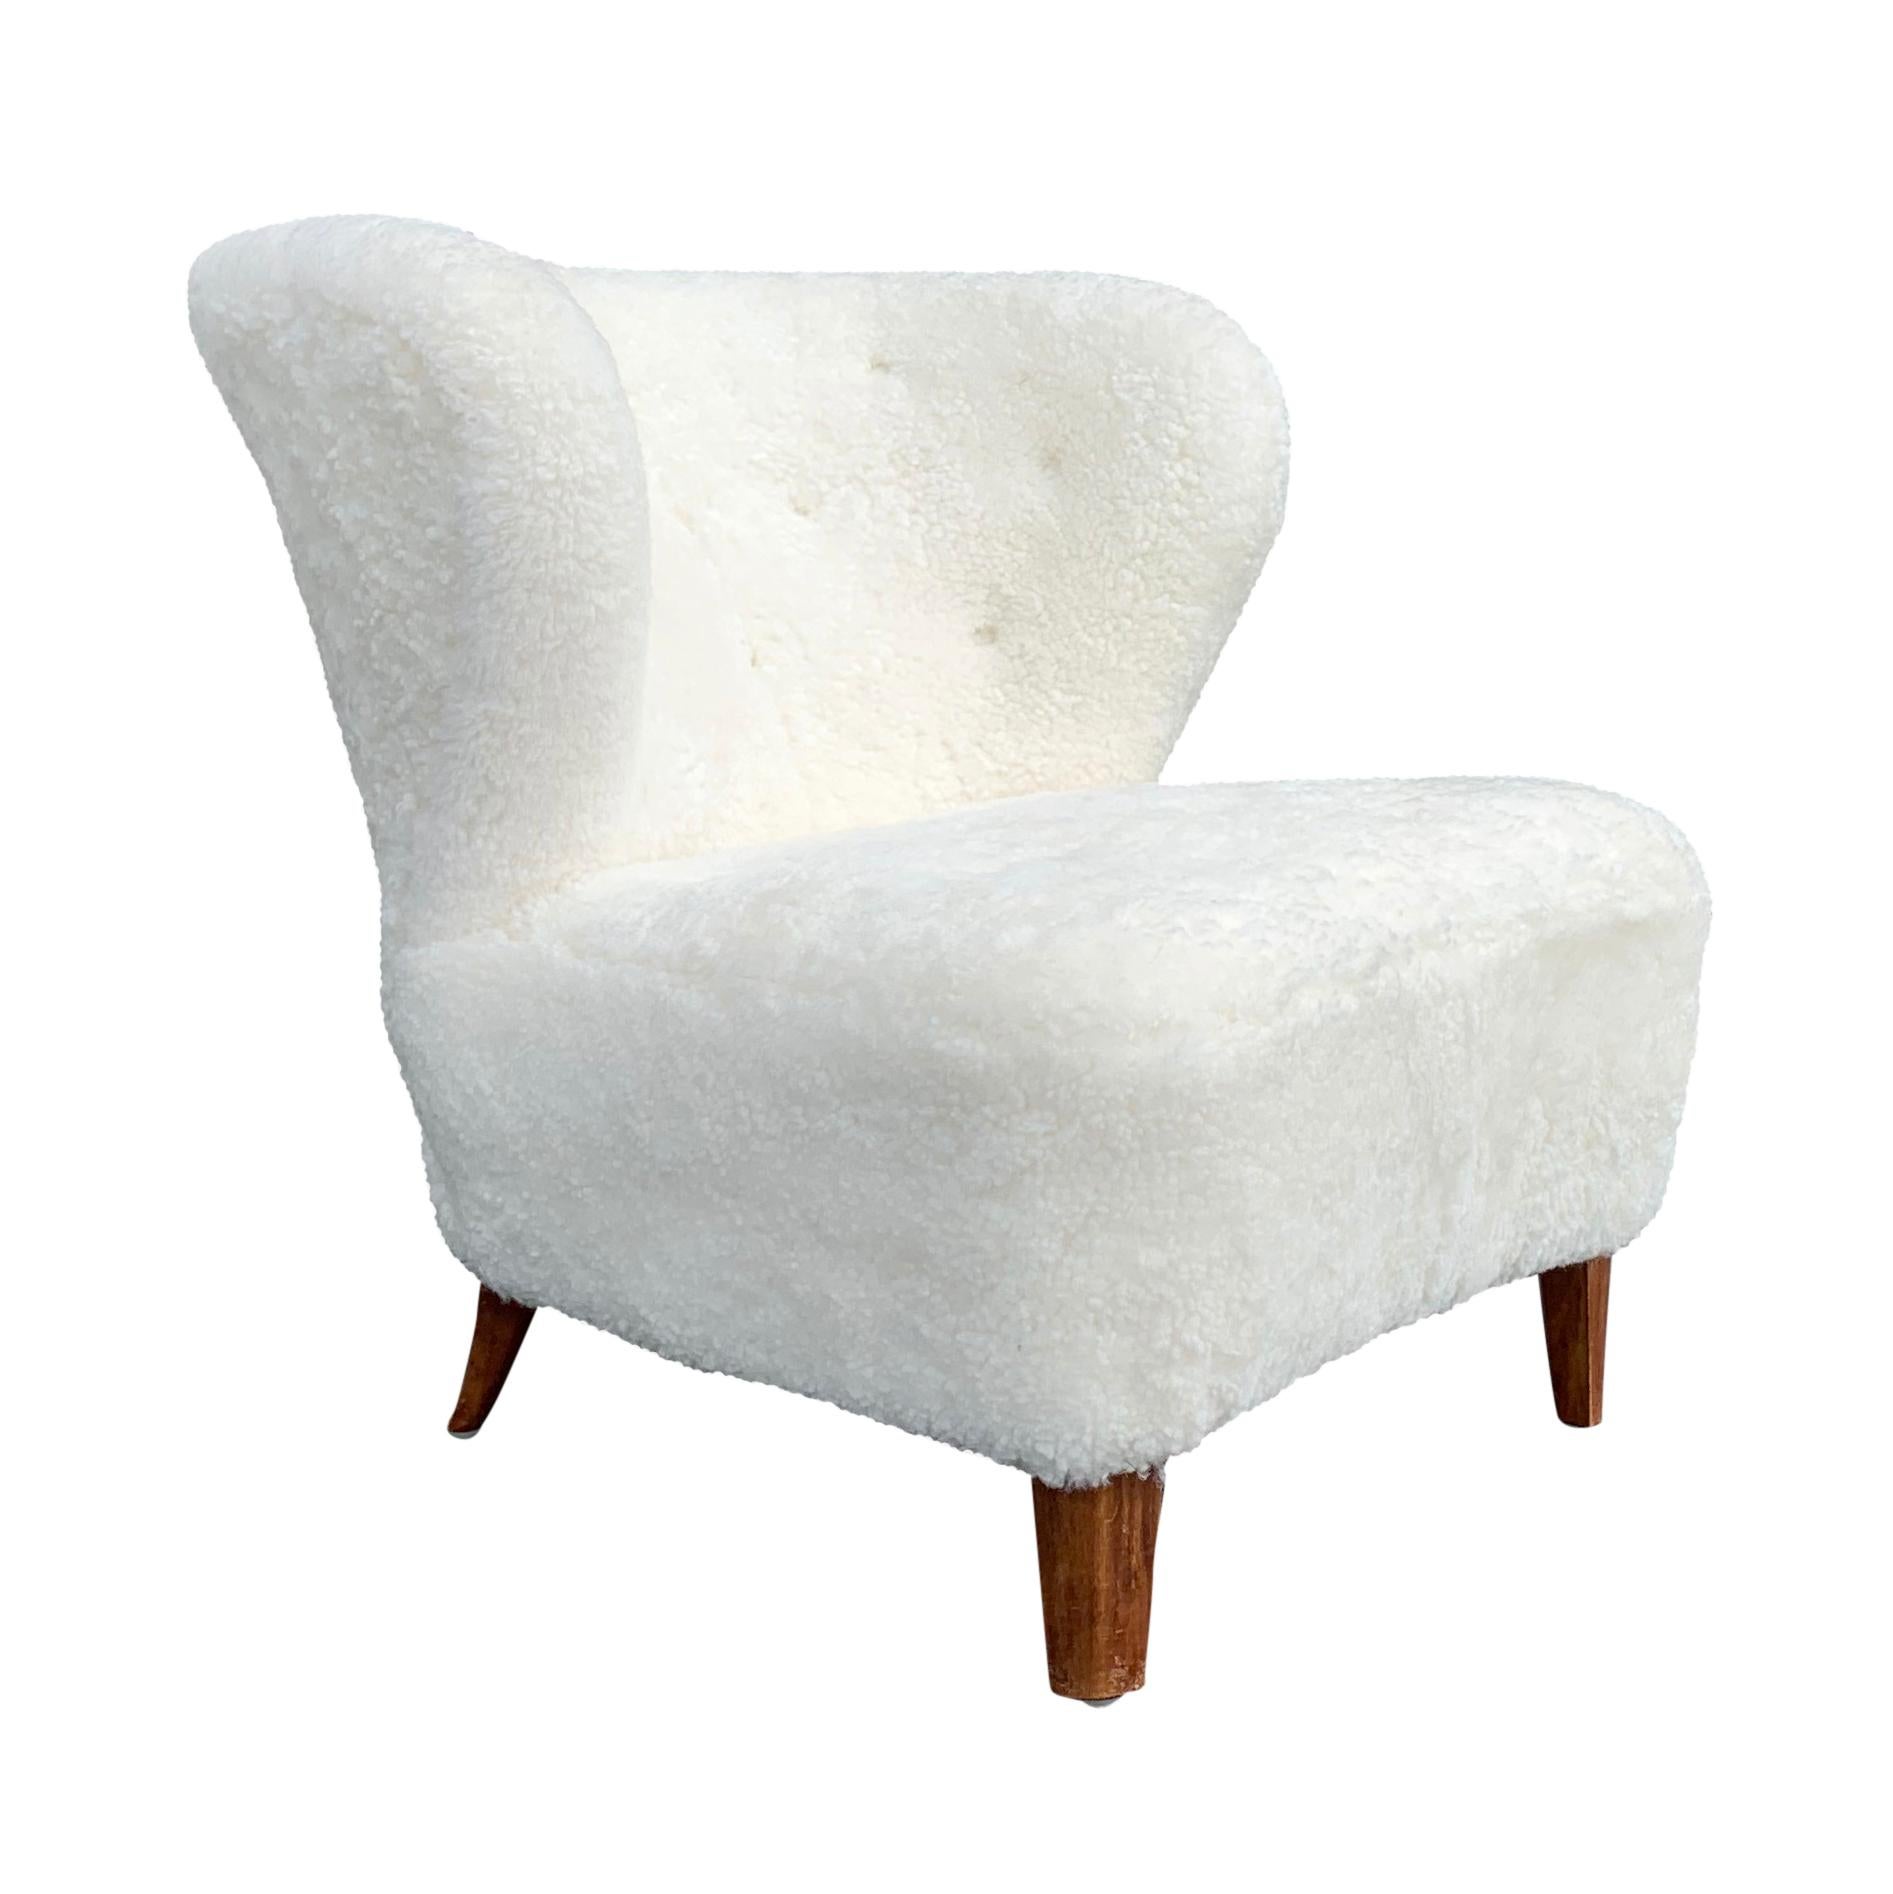 A vintage Mid-Century Modern Swedish lounge chair, designed by Goesta Jonsson and produced by Moeblering Affair, made of hand carved beechwood, in good condition. The Scandinavian side chair was newly upholstered in white sheepskin. Wear consistent